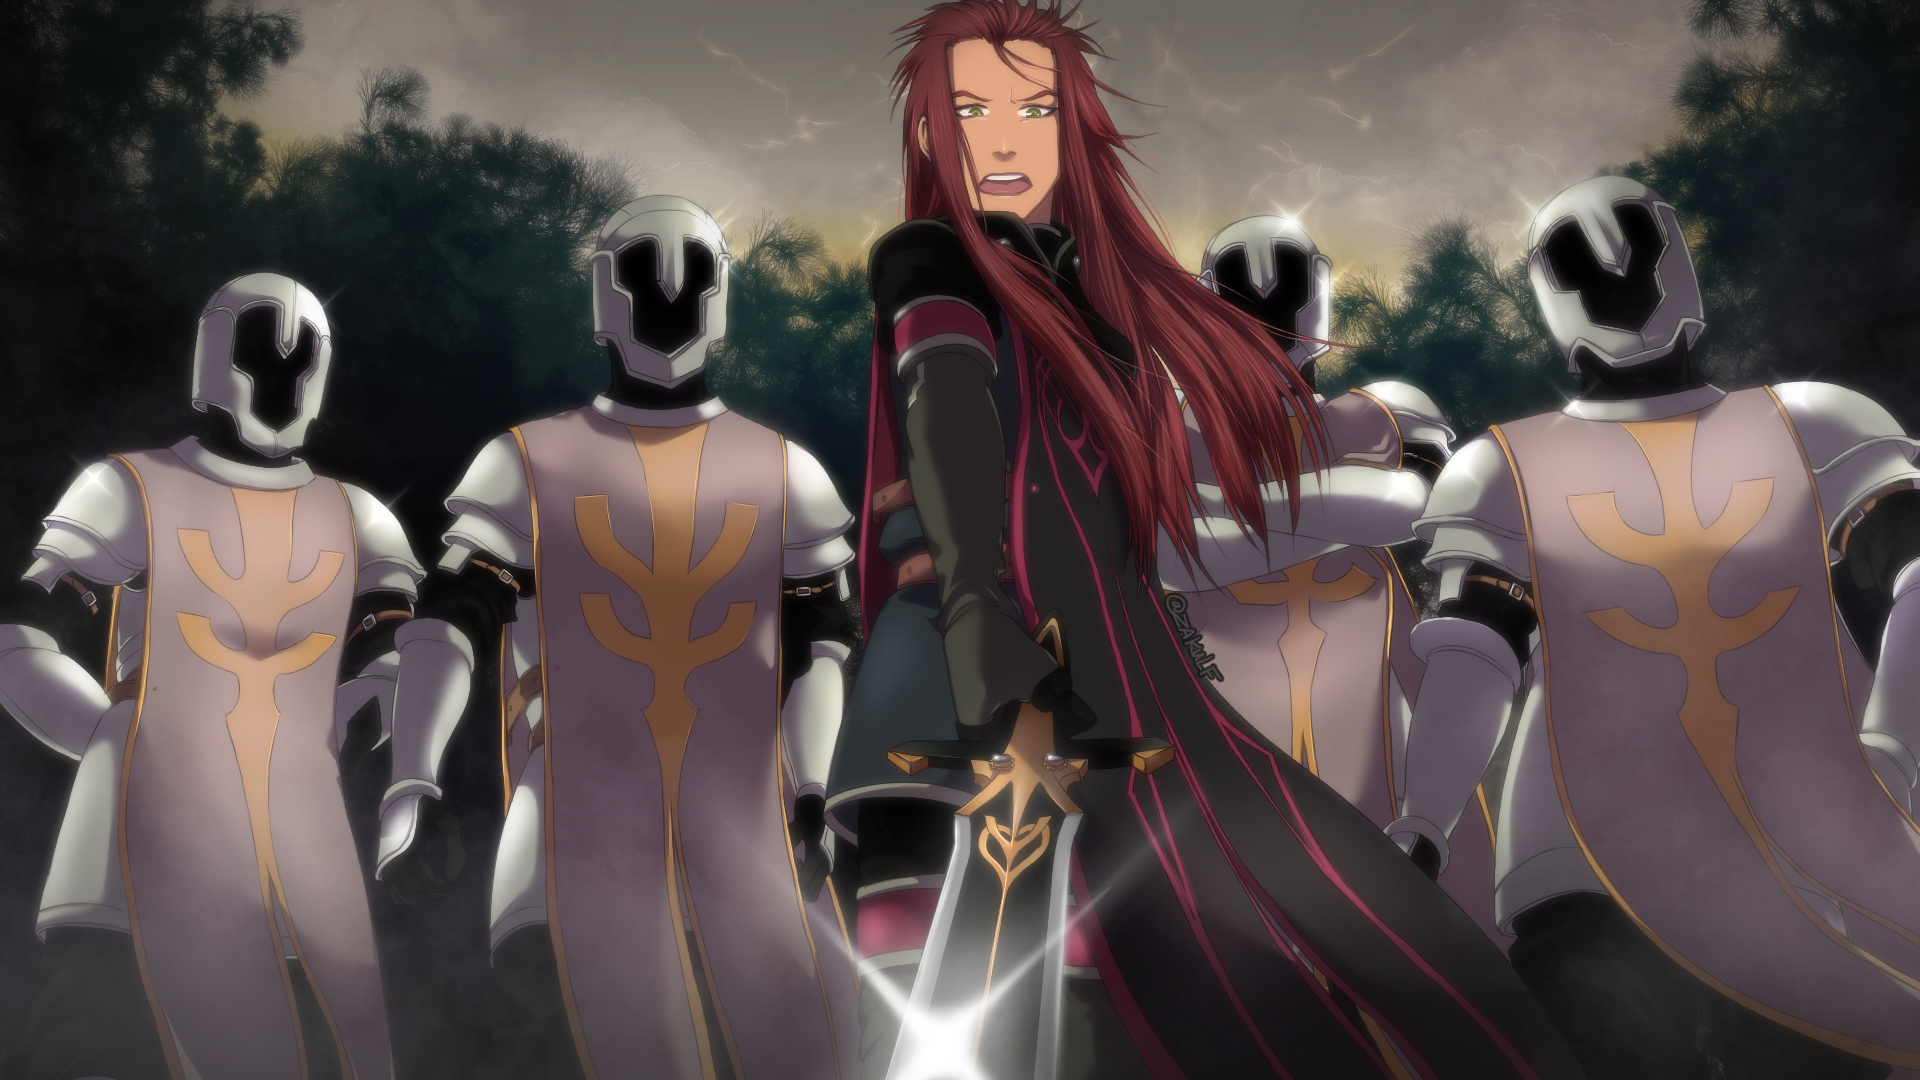 1920x1080 Asch the Bloody Tales of the Abyss Wallpaper #2737699 Zerochan Anime Image Board